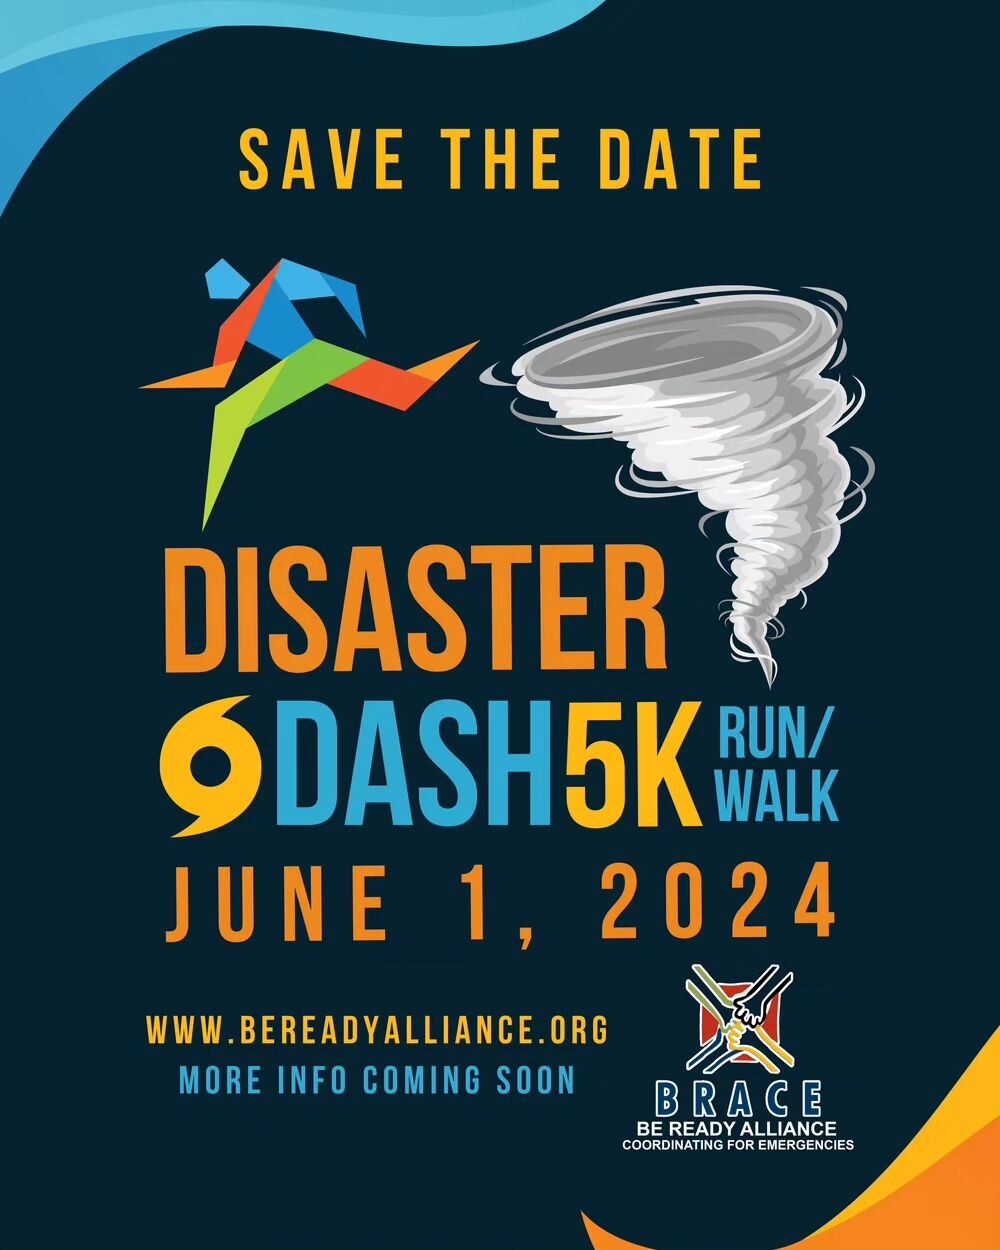 🌊Save the date!🌪

Come out to the Disaster Dash 5K Run/Walk and support disaster preparedness in the Pensacola area! June 1st. @bracebeready